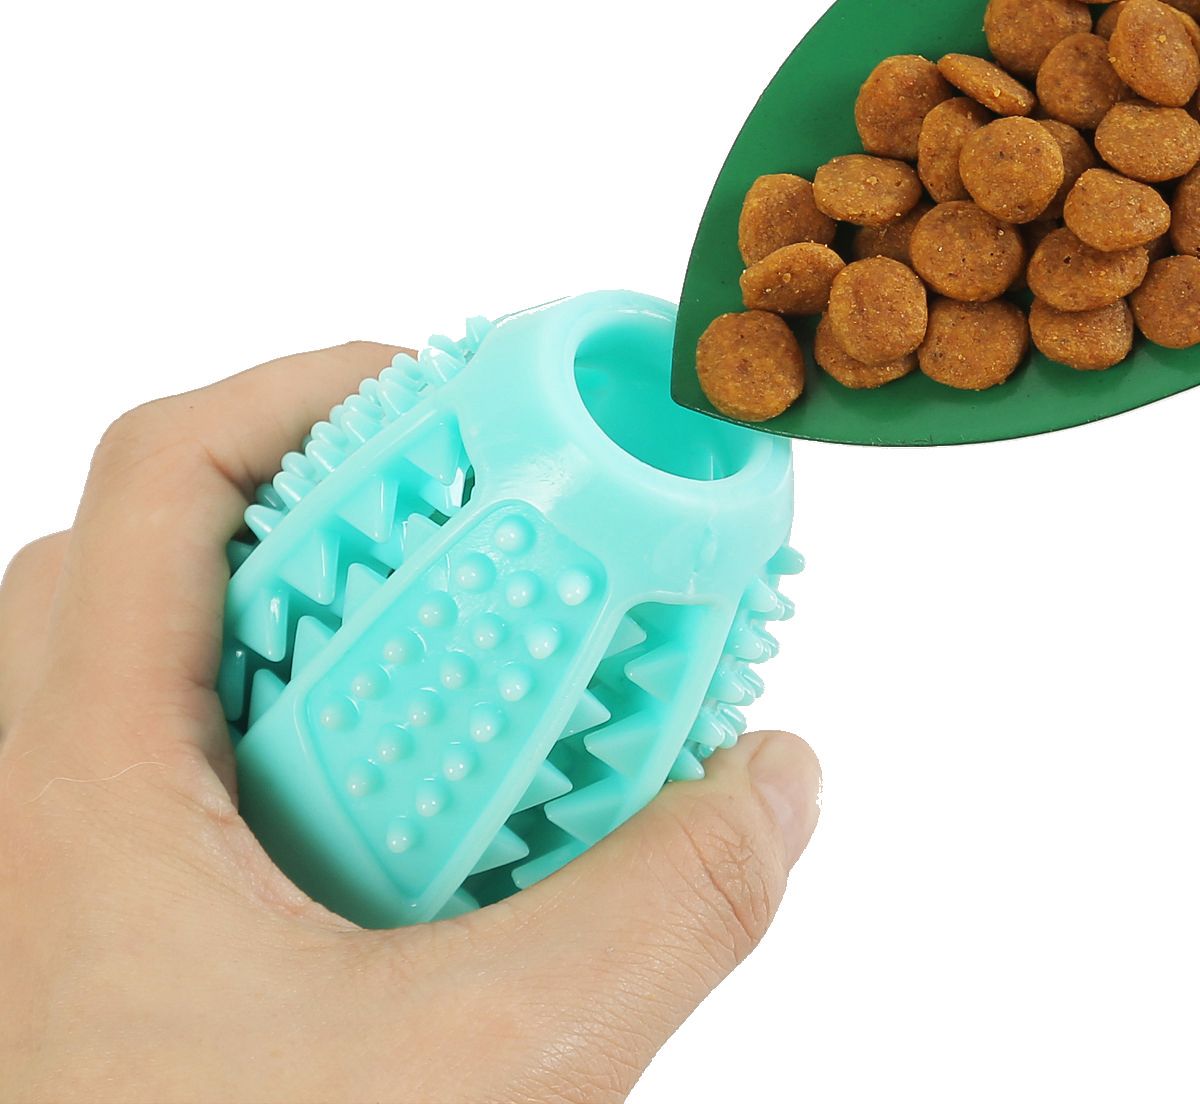 Pet Life 'Grip N' Play' Treat Dispensing Football Shaped Suction Cup Dog Toy - Blue